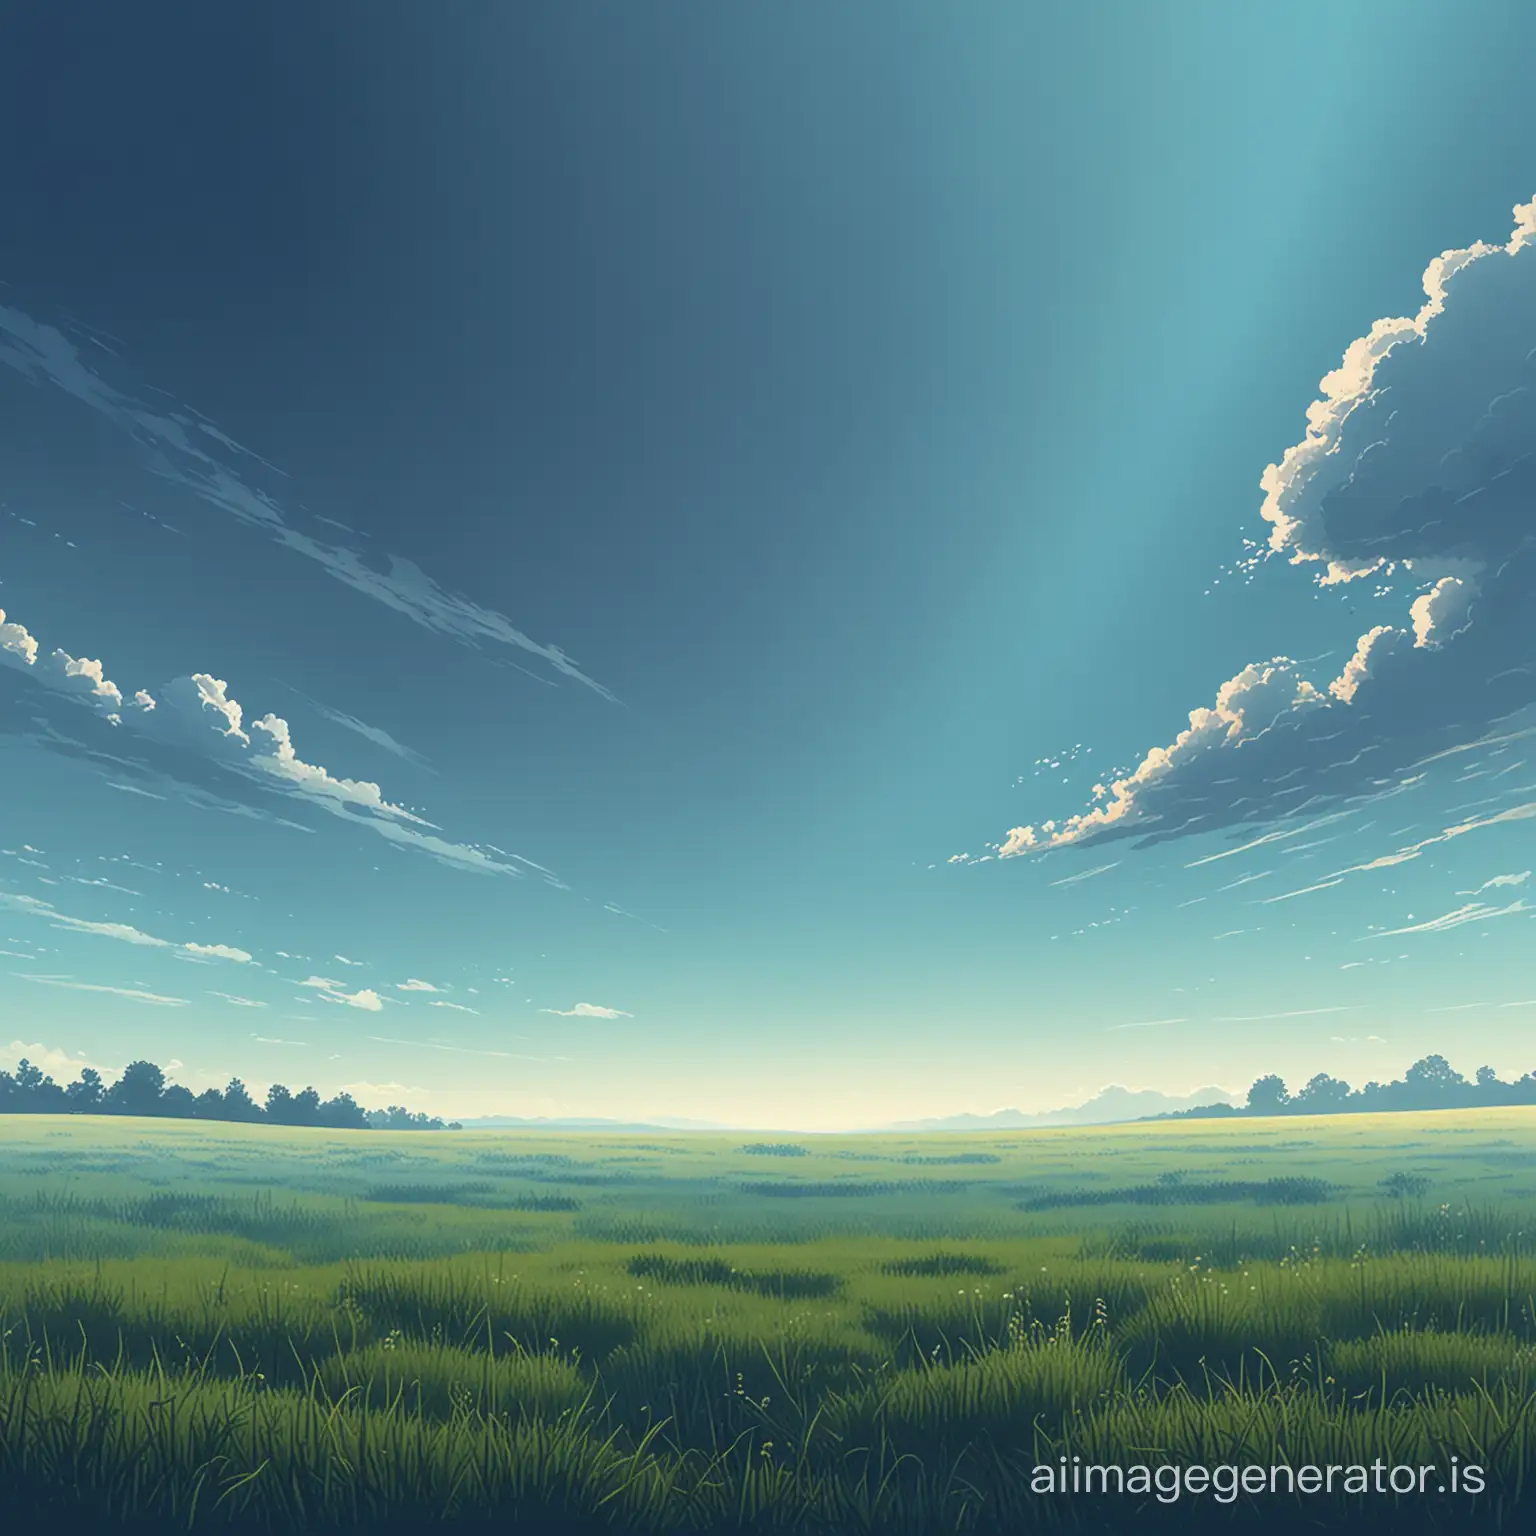 blue sky gradient, illustration style, with distant clouds above meadow. No sun